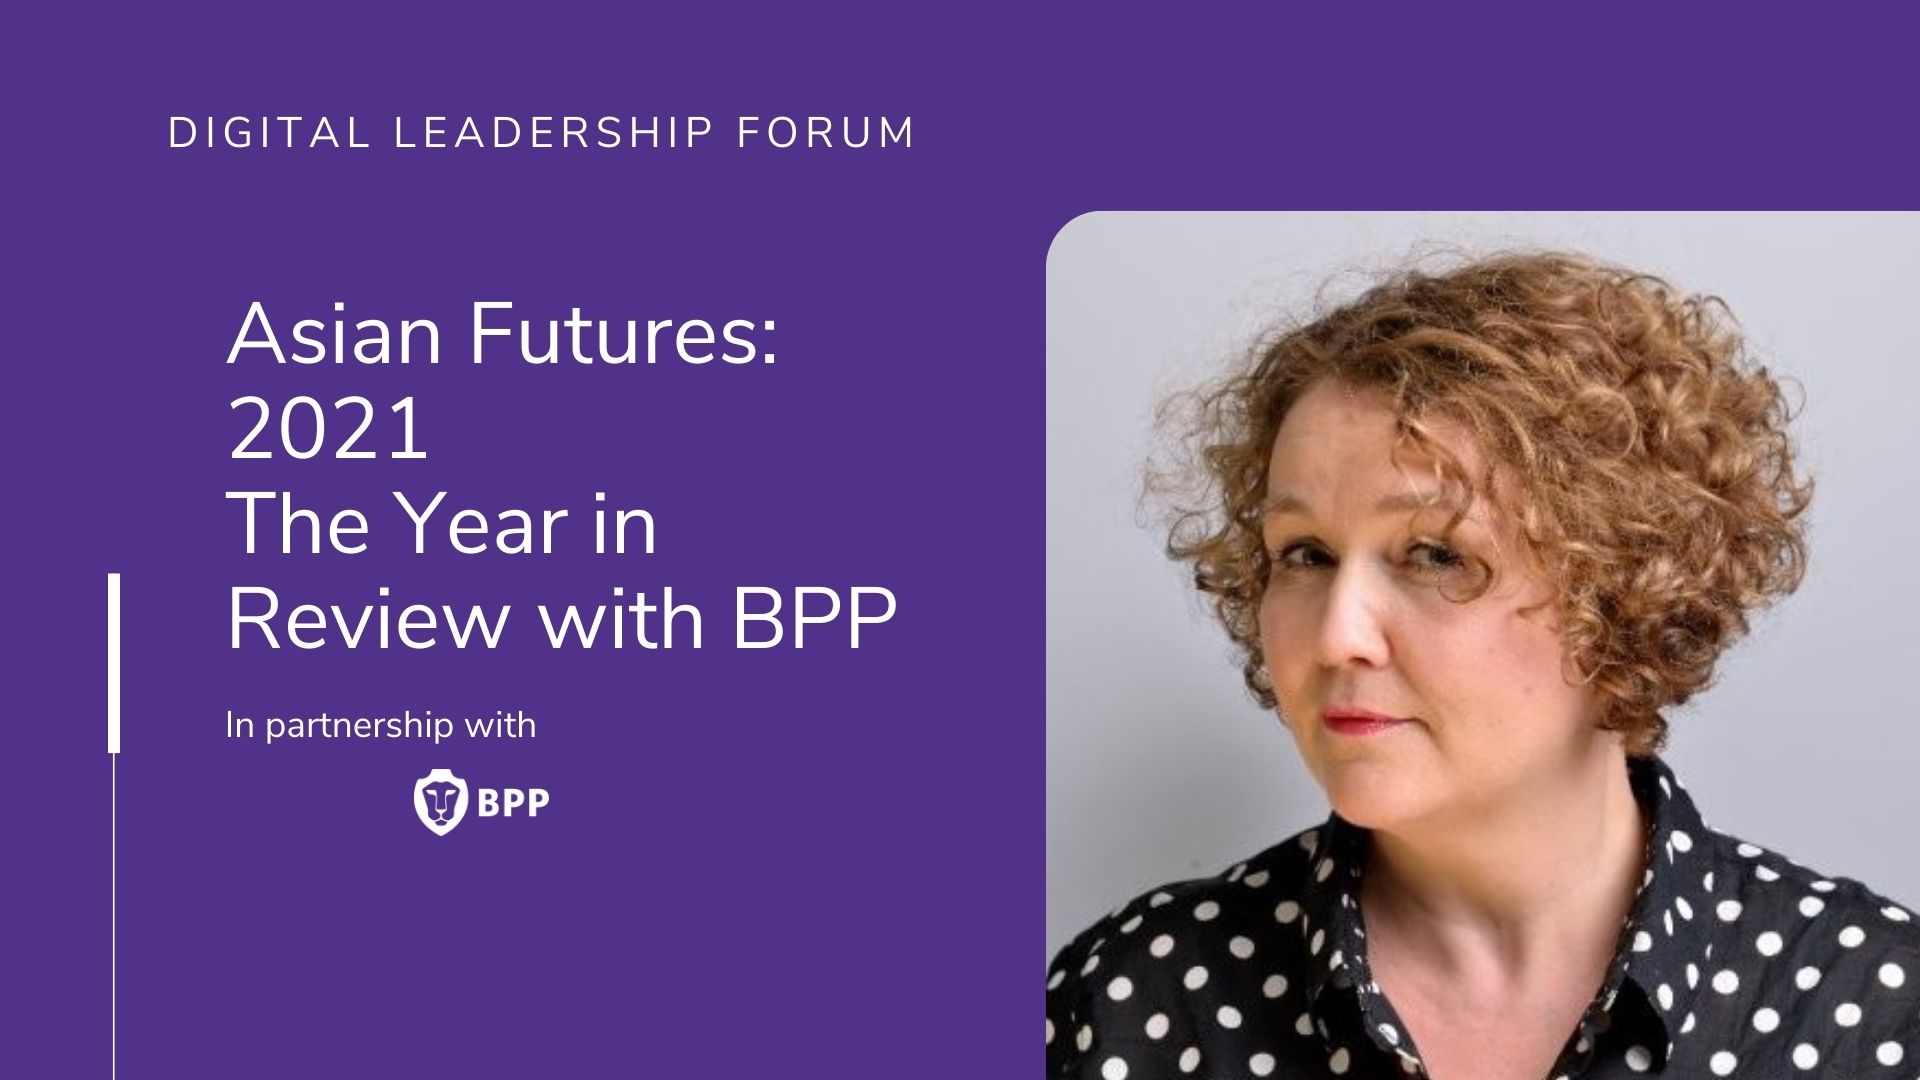 Video: The Year 2021 in Review with BPP